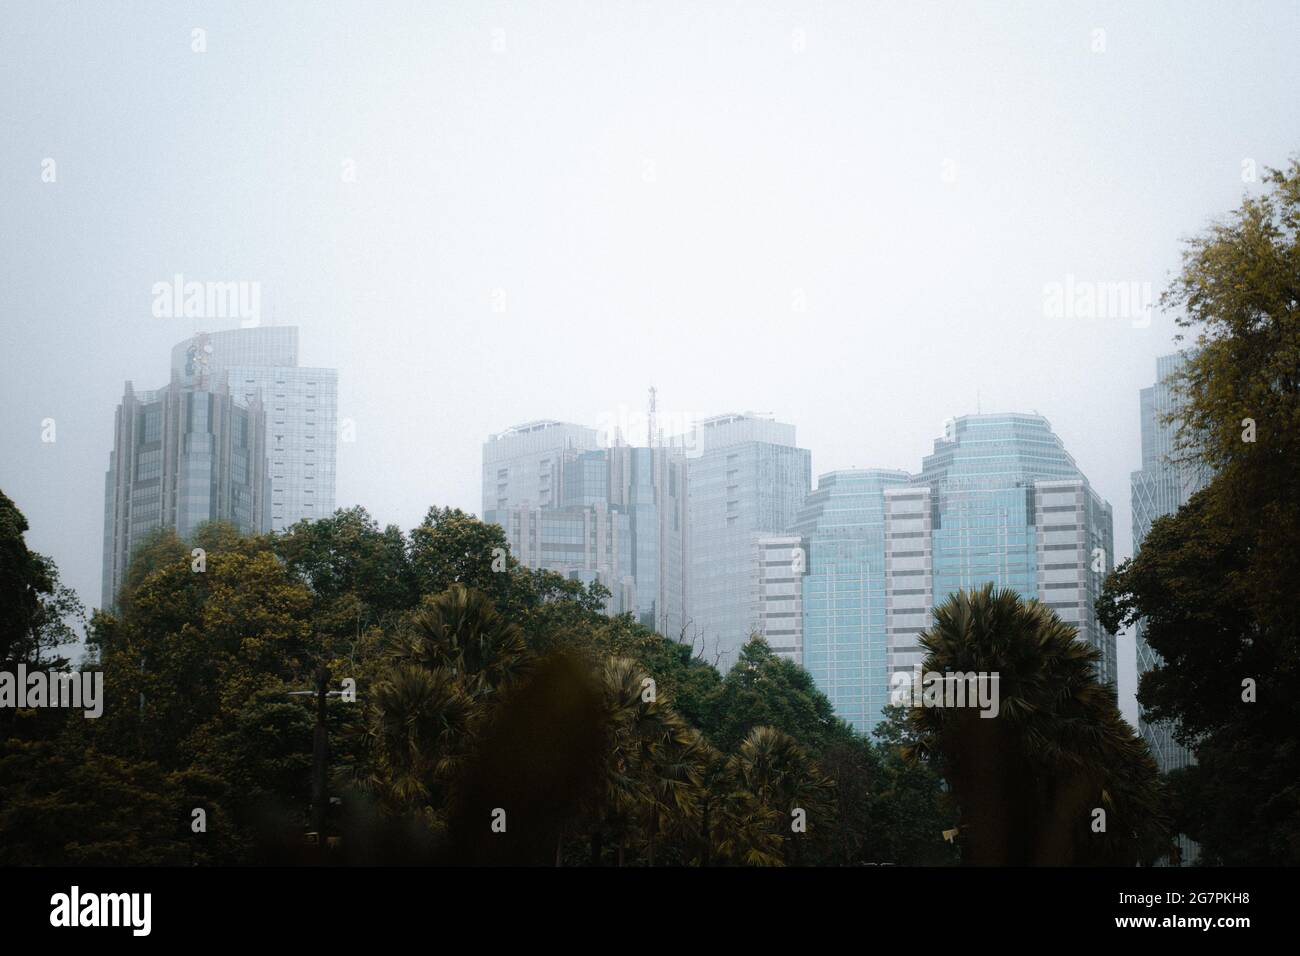 View of Sudirman Central Business District in Jakarta Indonesia on a foggy day Stock Photo